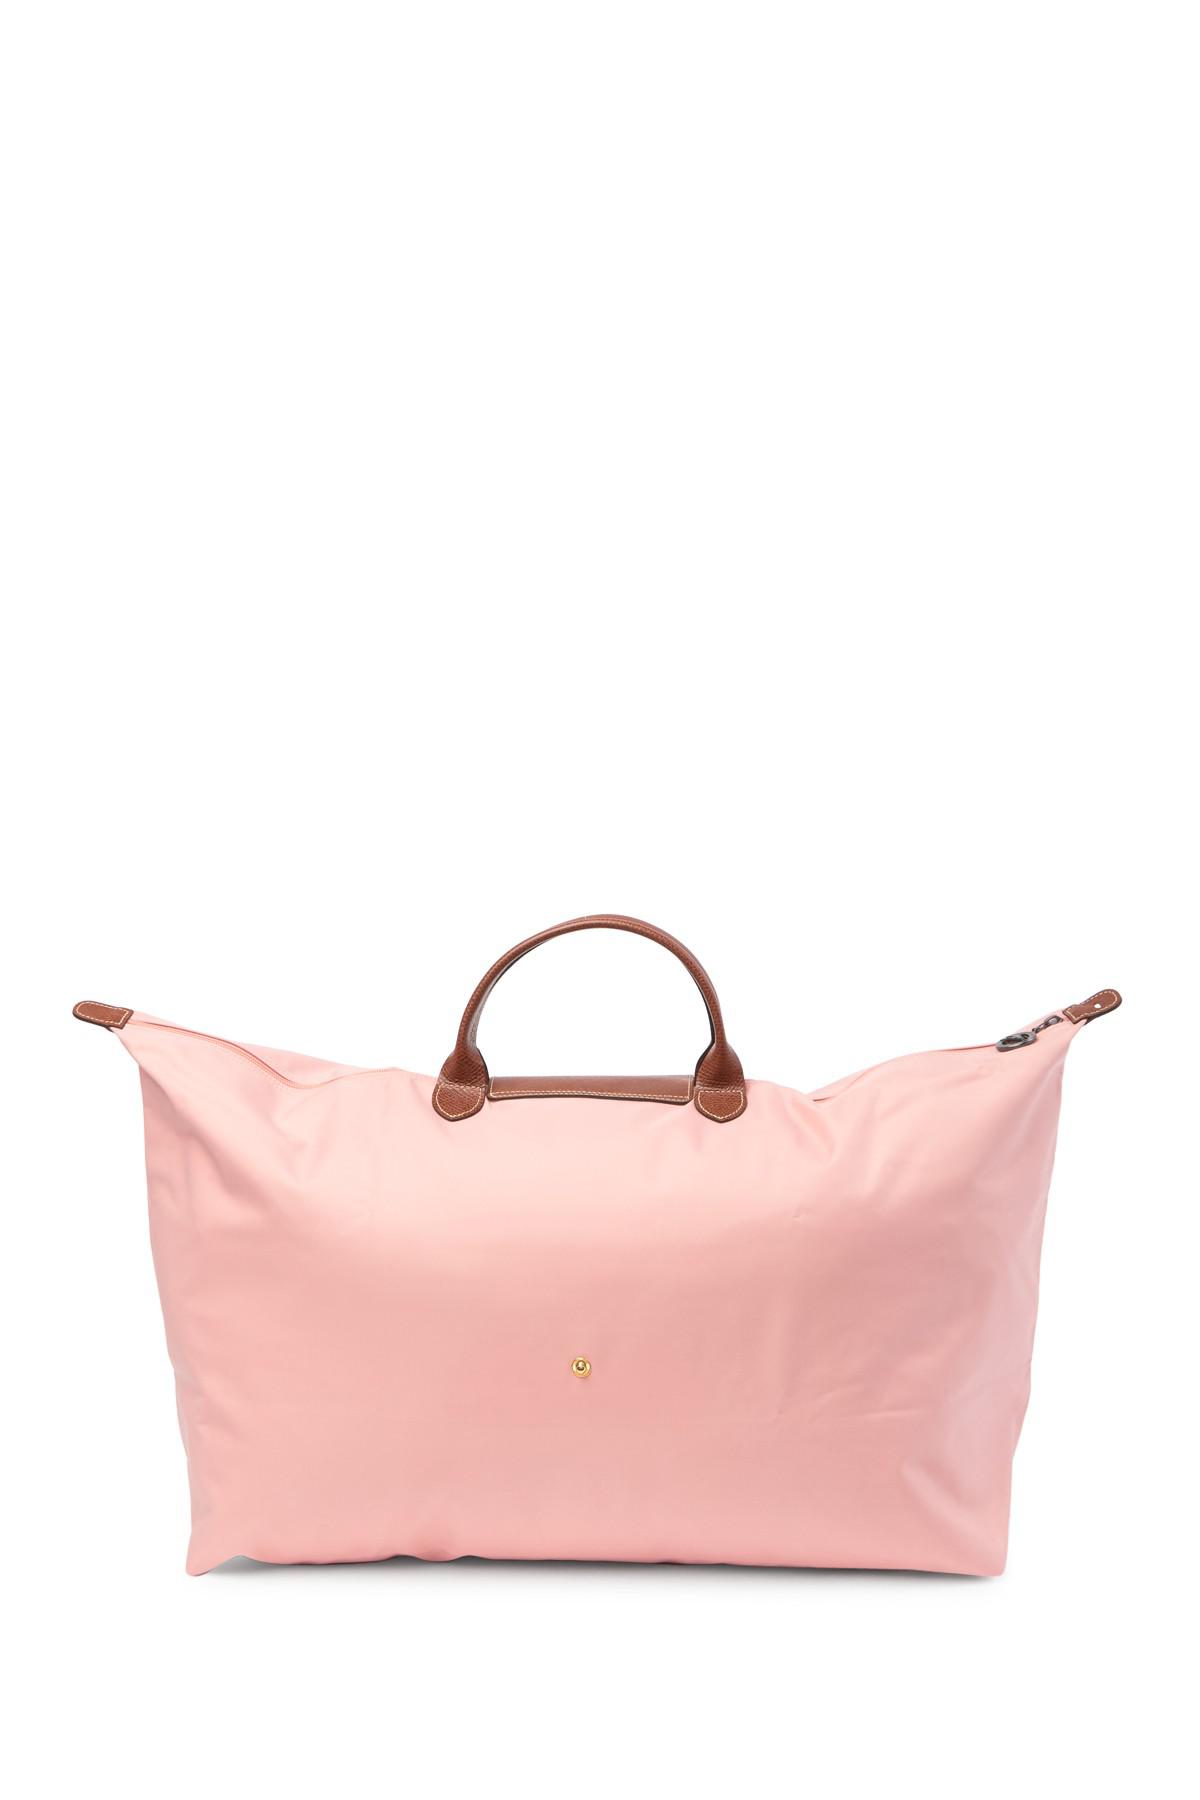 Longchamp Le Pliage Xl Travel Tote Bag in Pink | Lyst